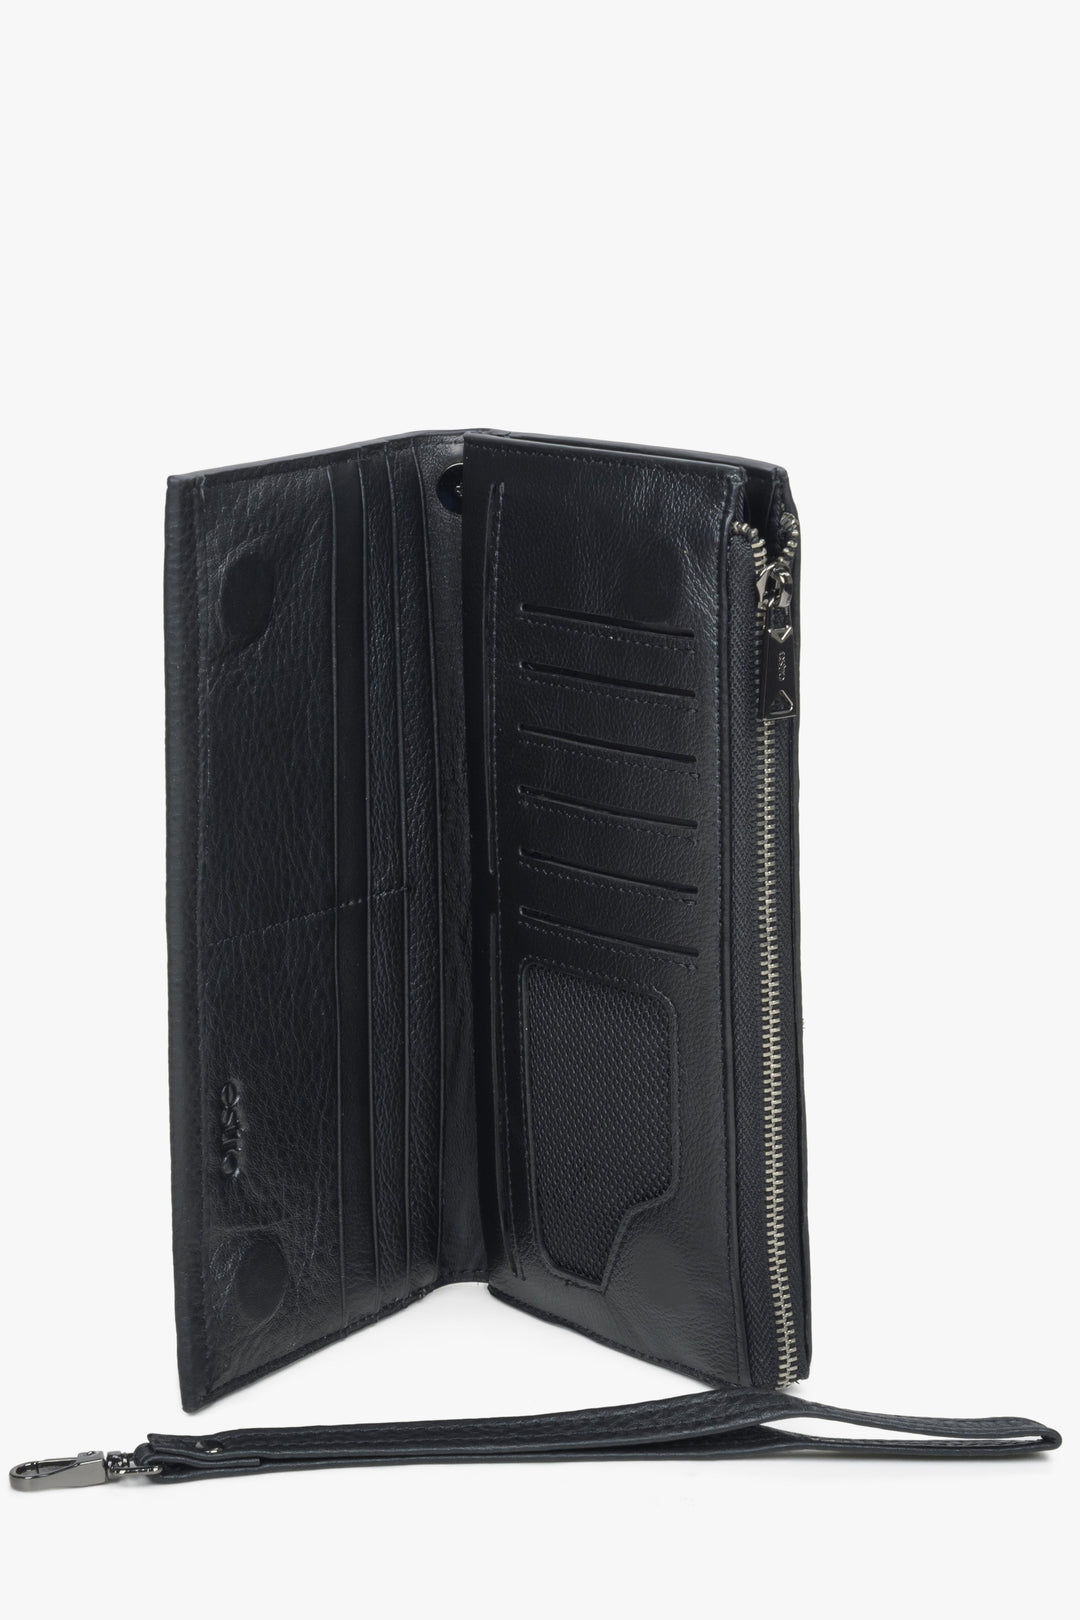 Men's wallet with detachable strap in black made of genuine leather.